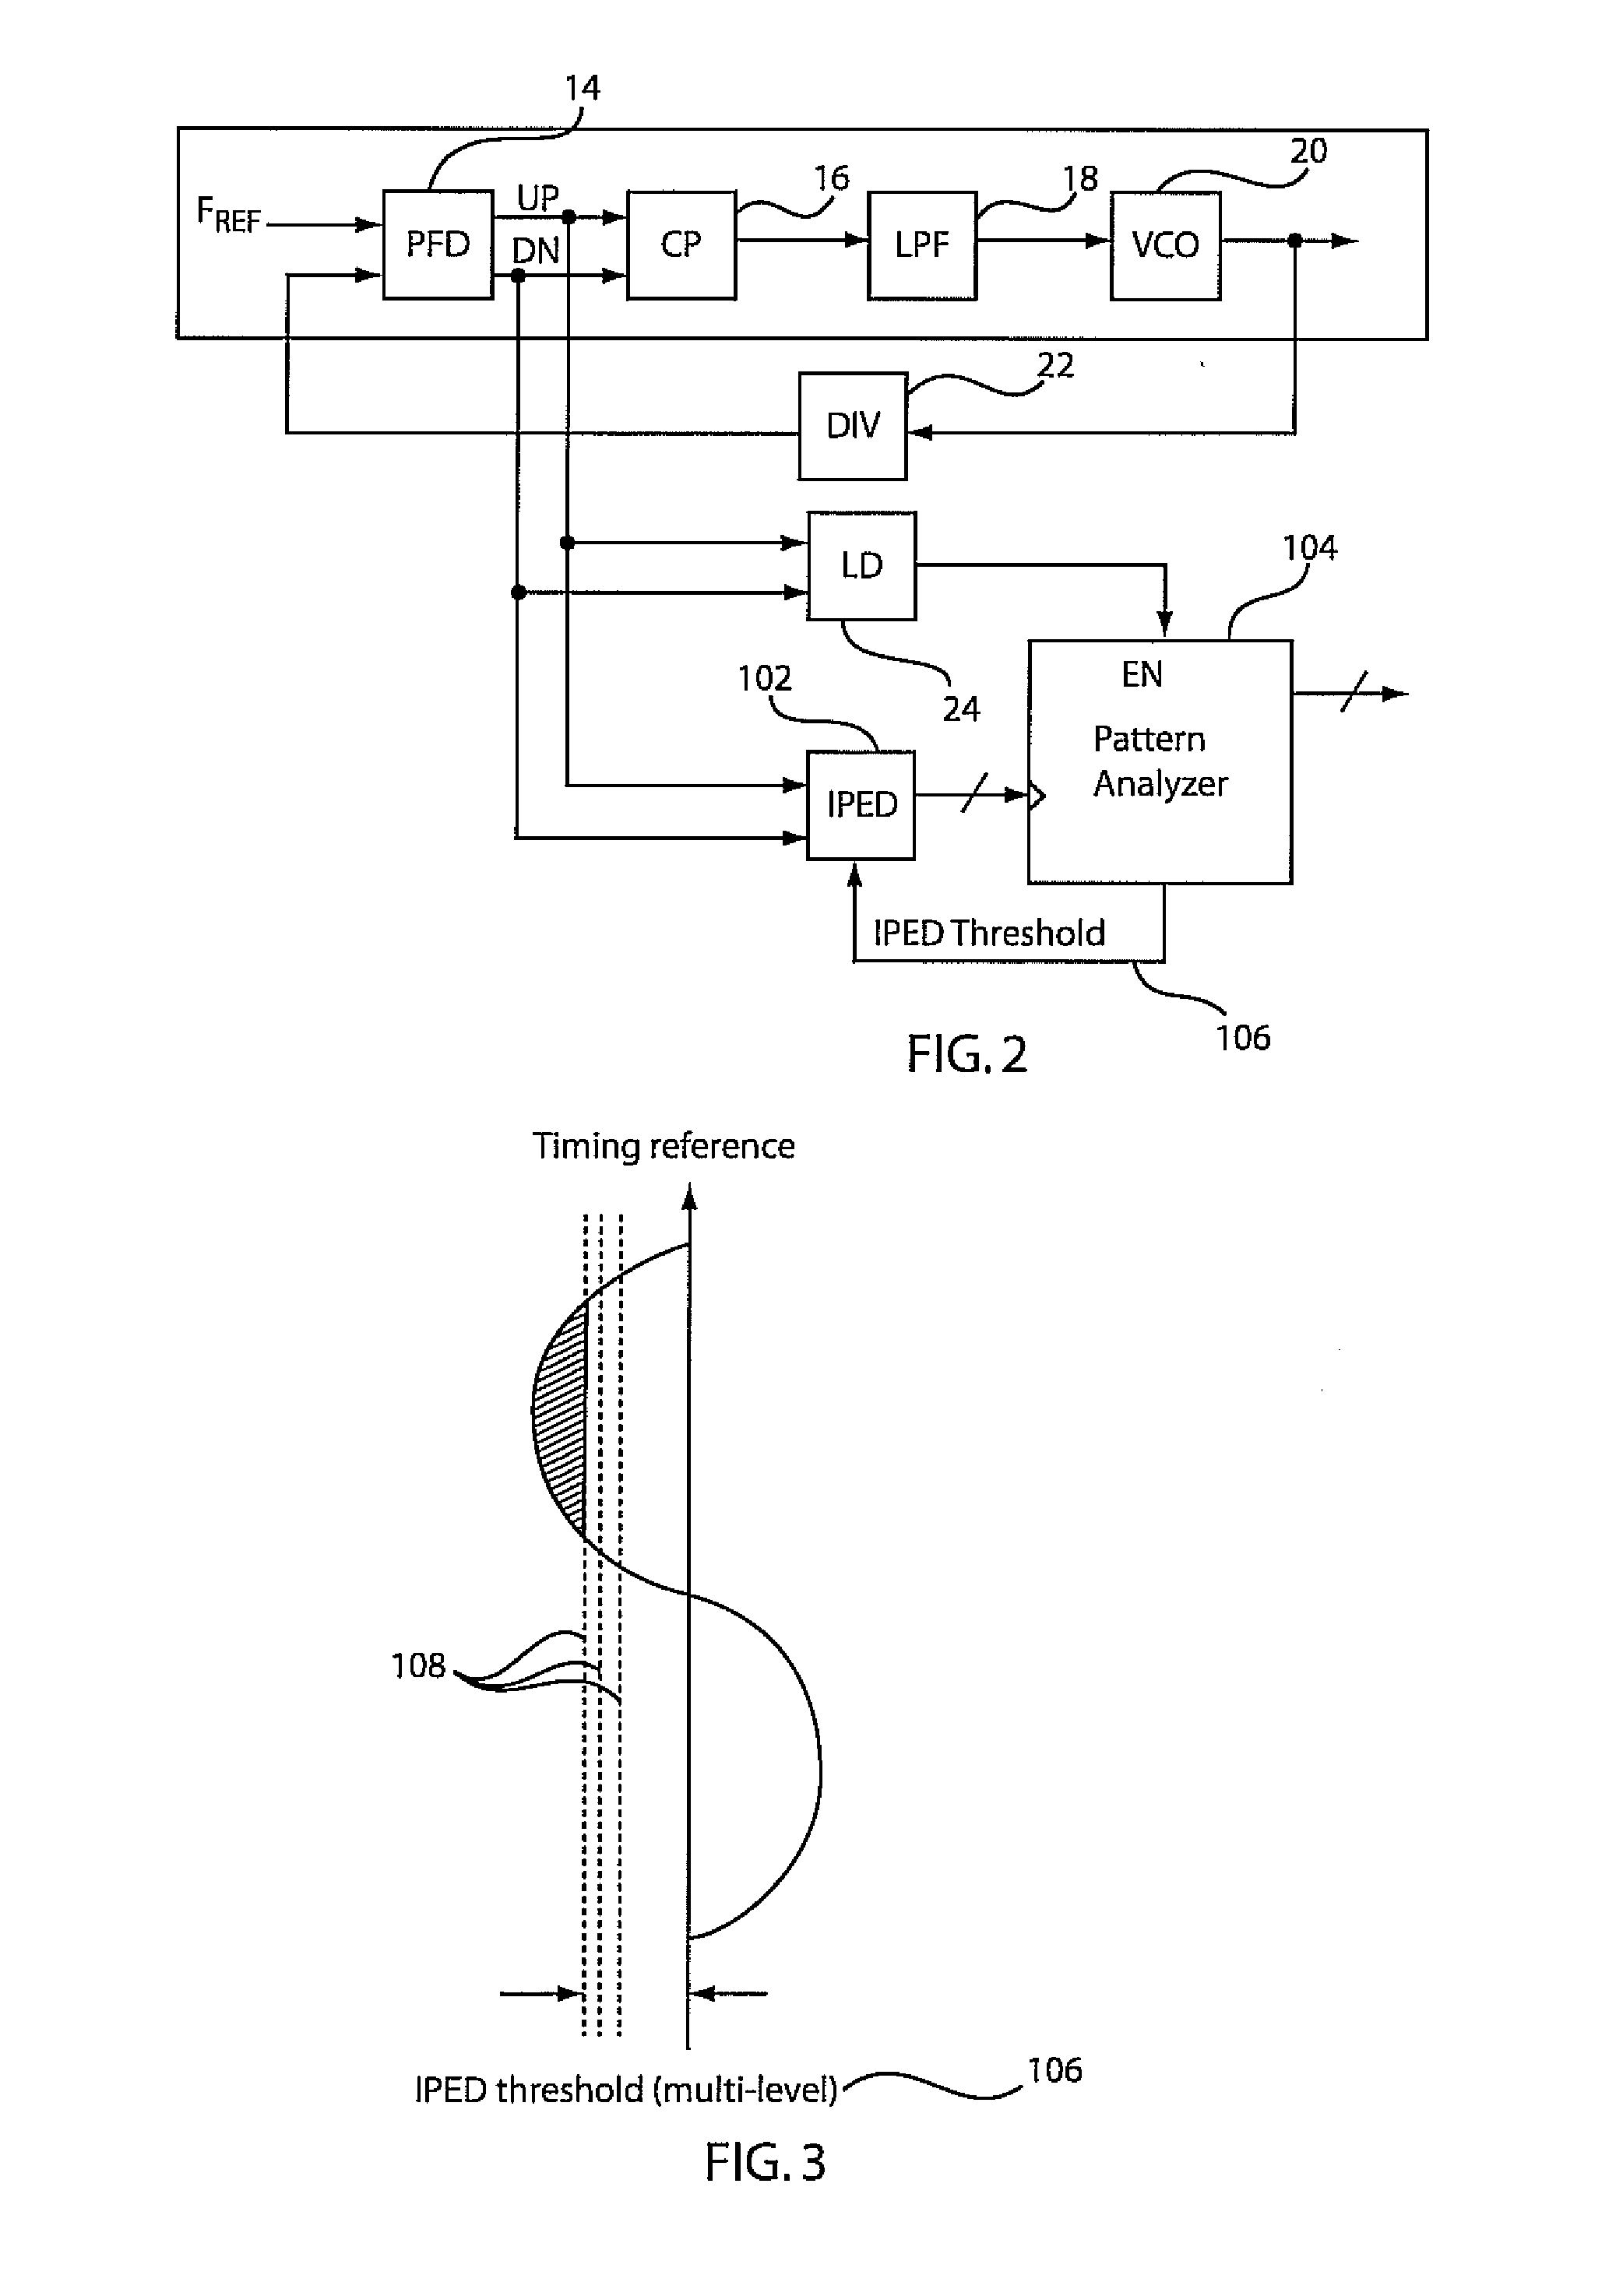 Method and apparatus for on-chip phase error measurement to determine jitter in phase-locked loops